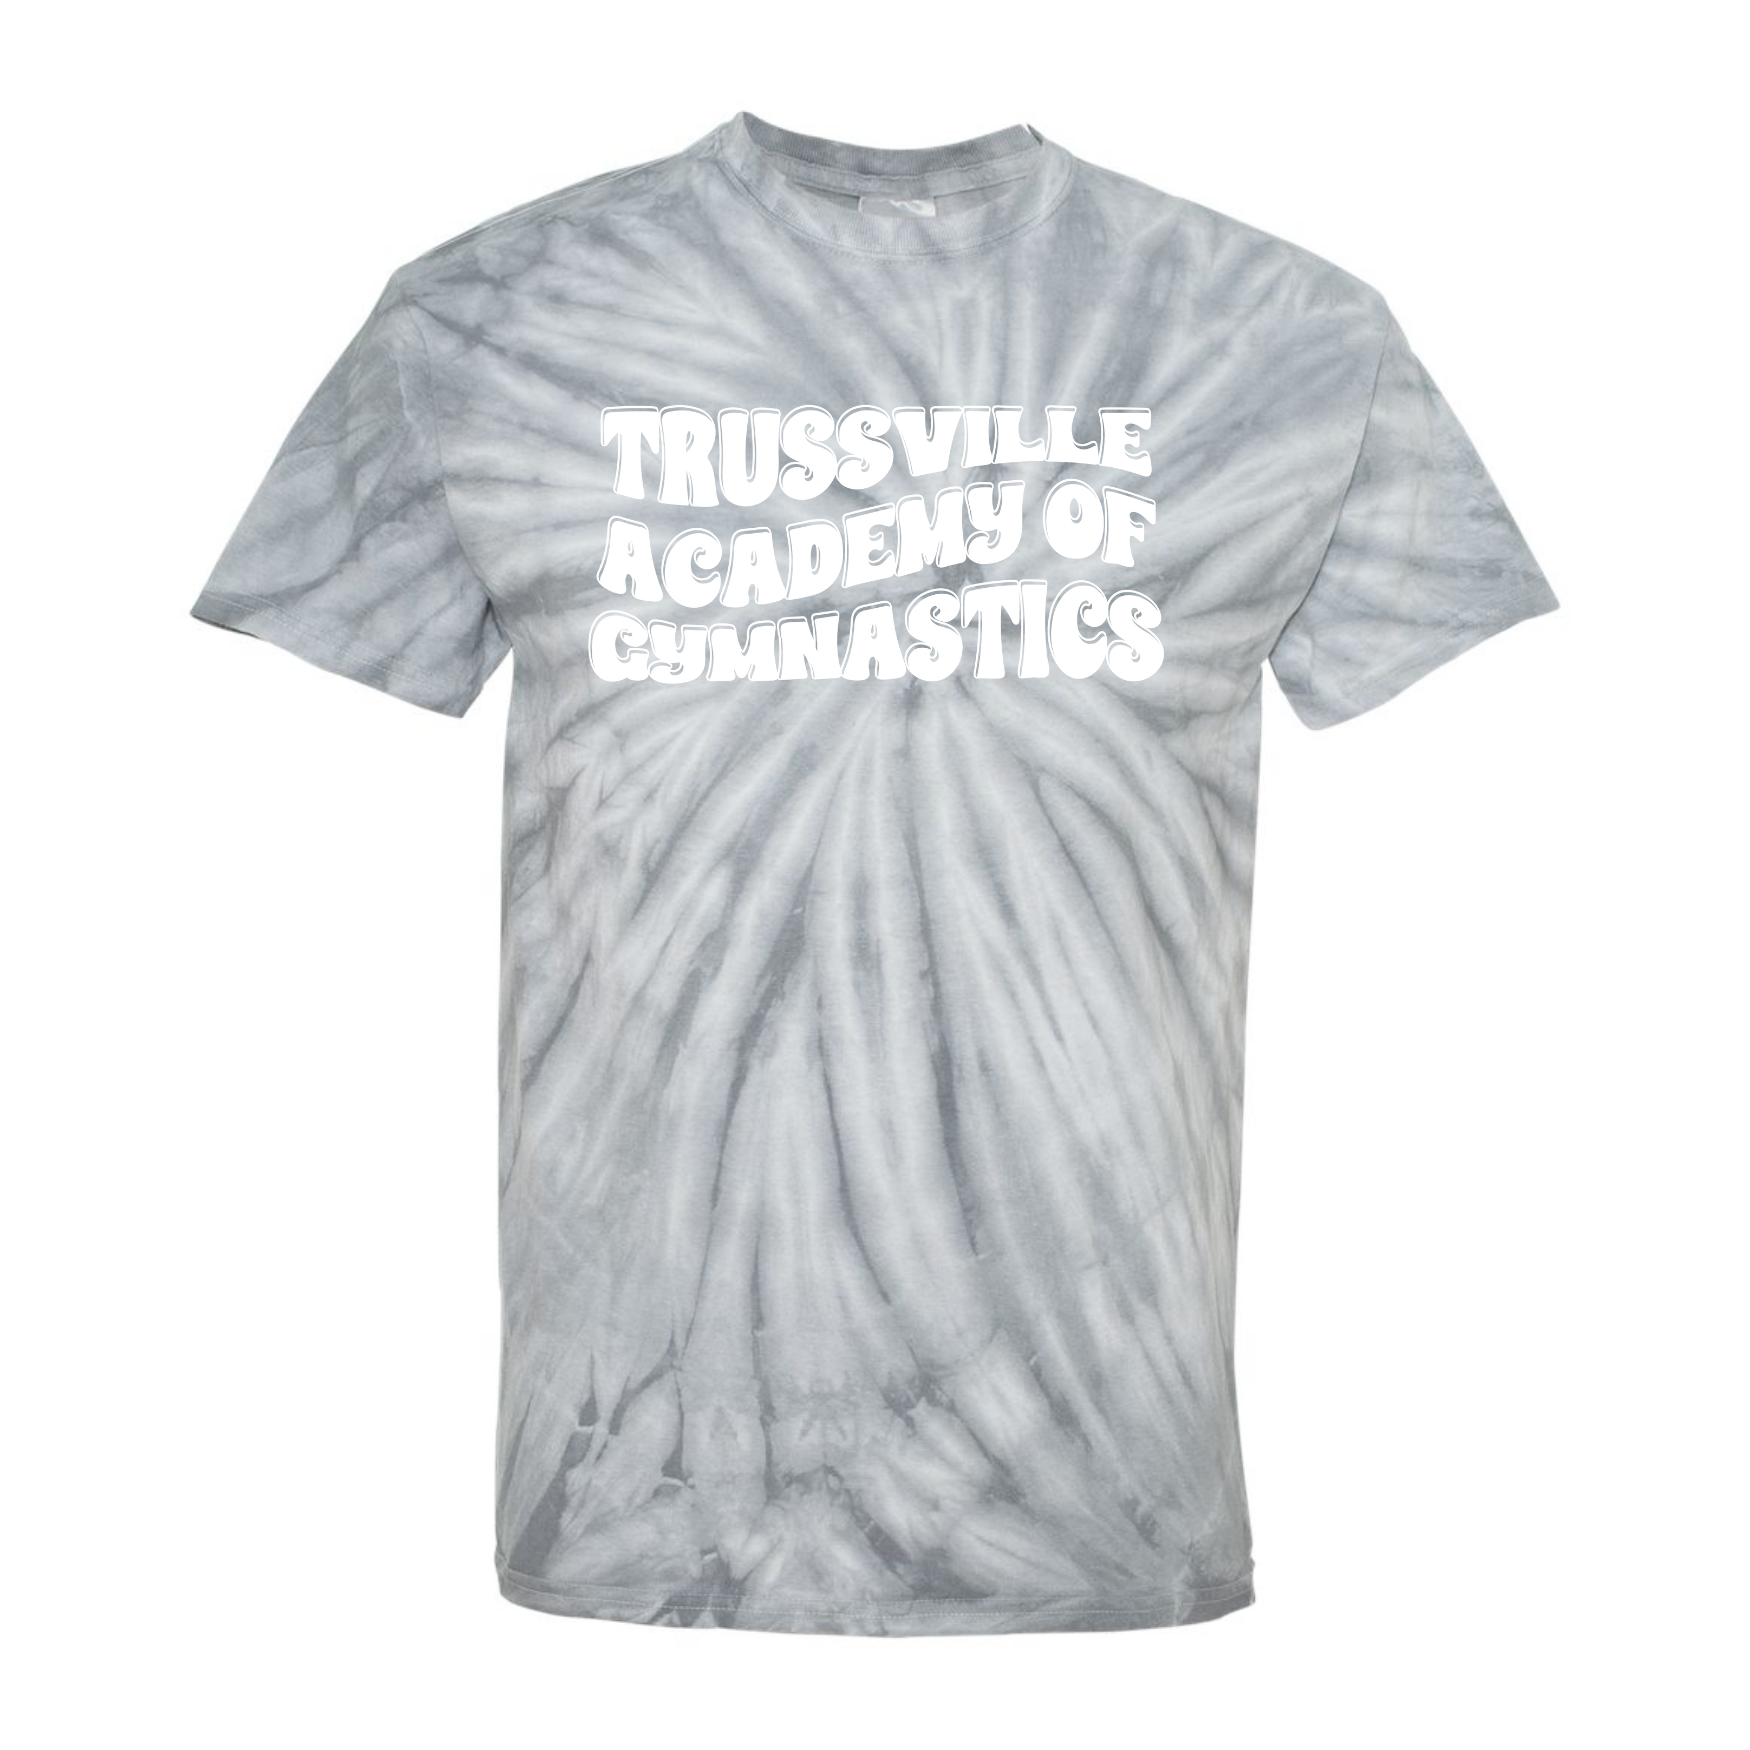 Groovy Trussville Academy of Gymnastics | Youth Tie Dye Tee-Sister Shirts-Sister Shirts, Cute & Custom Tees for Mama & Littles in Trussville, Alabama.